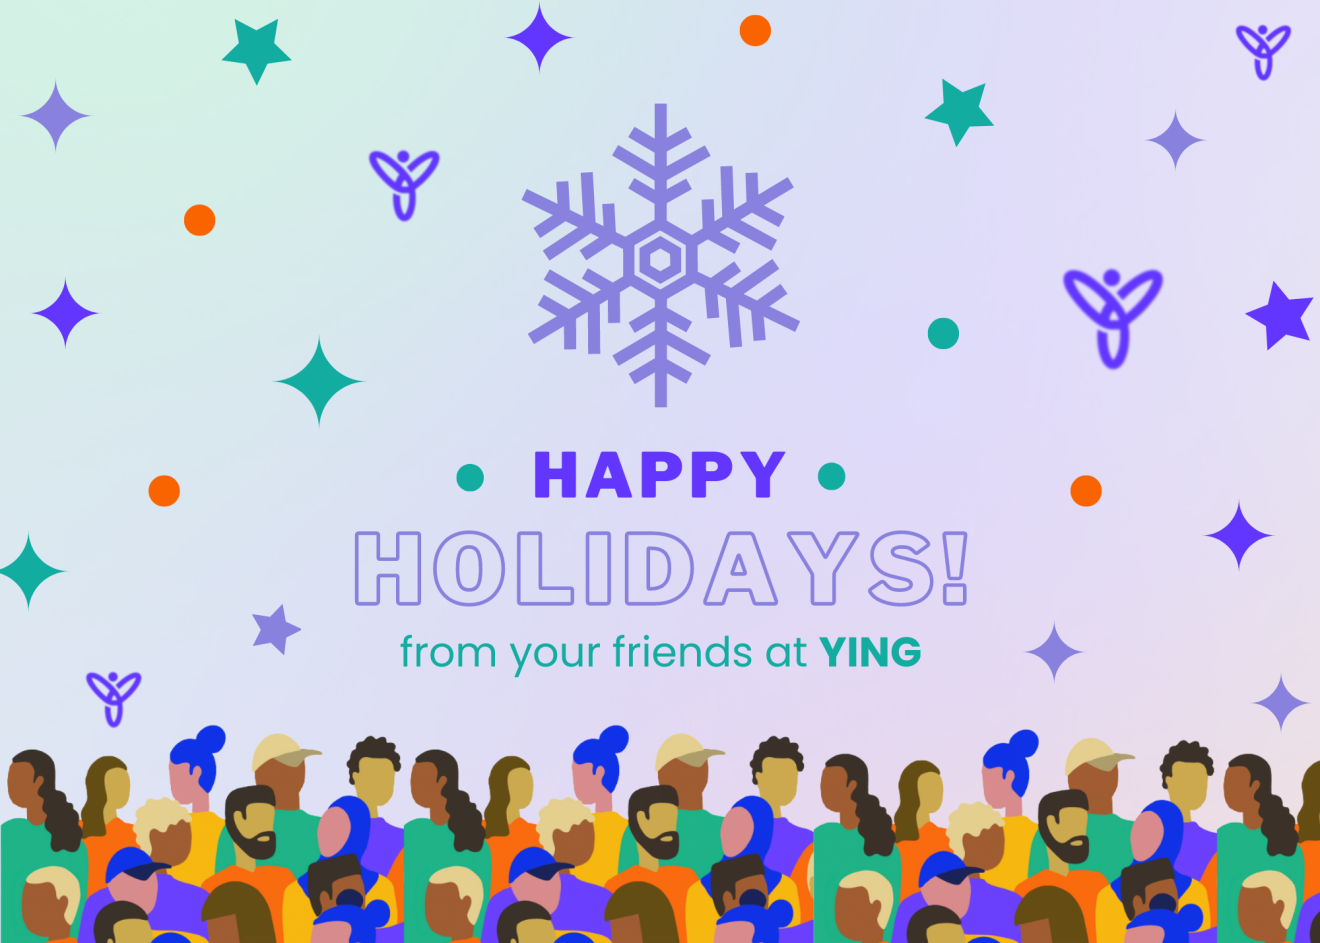 We wish you abundance and joy in the new year! Happy Holidays!